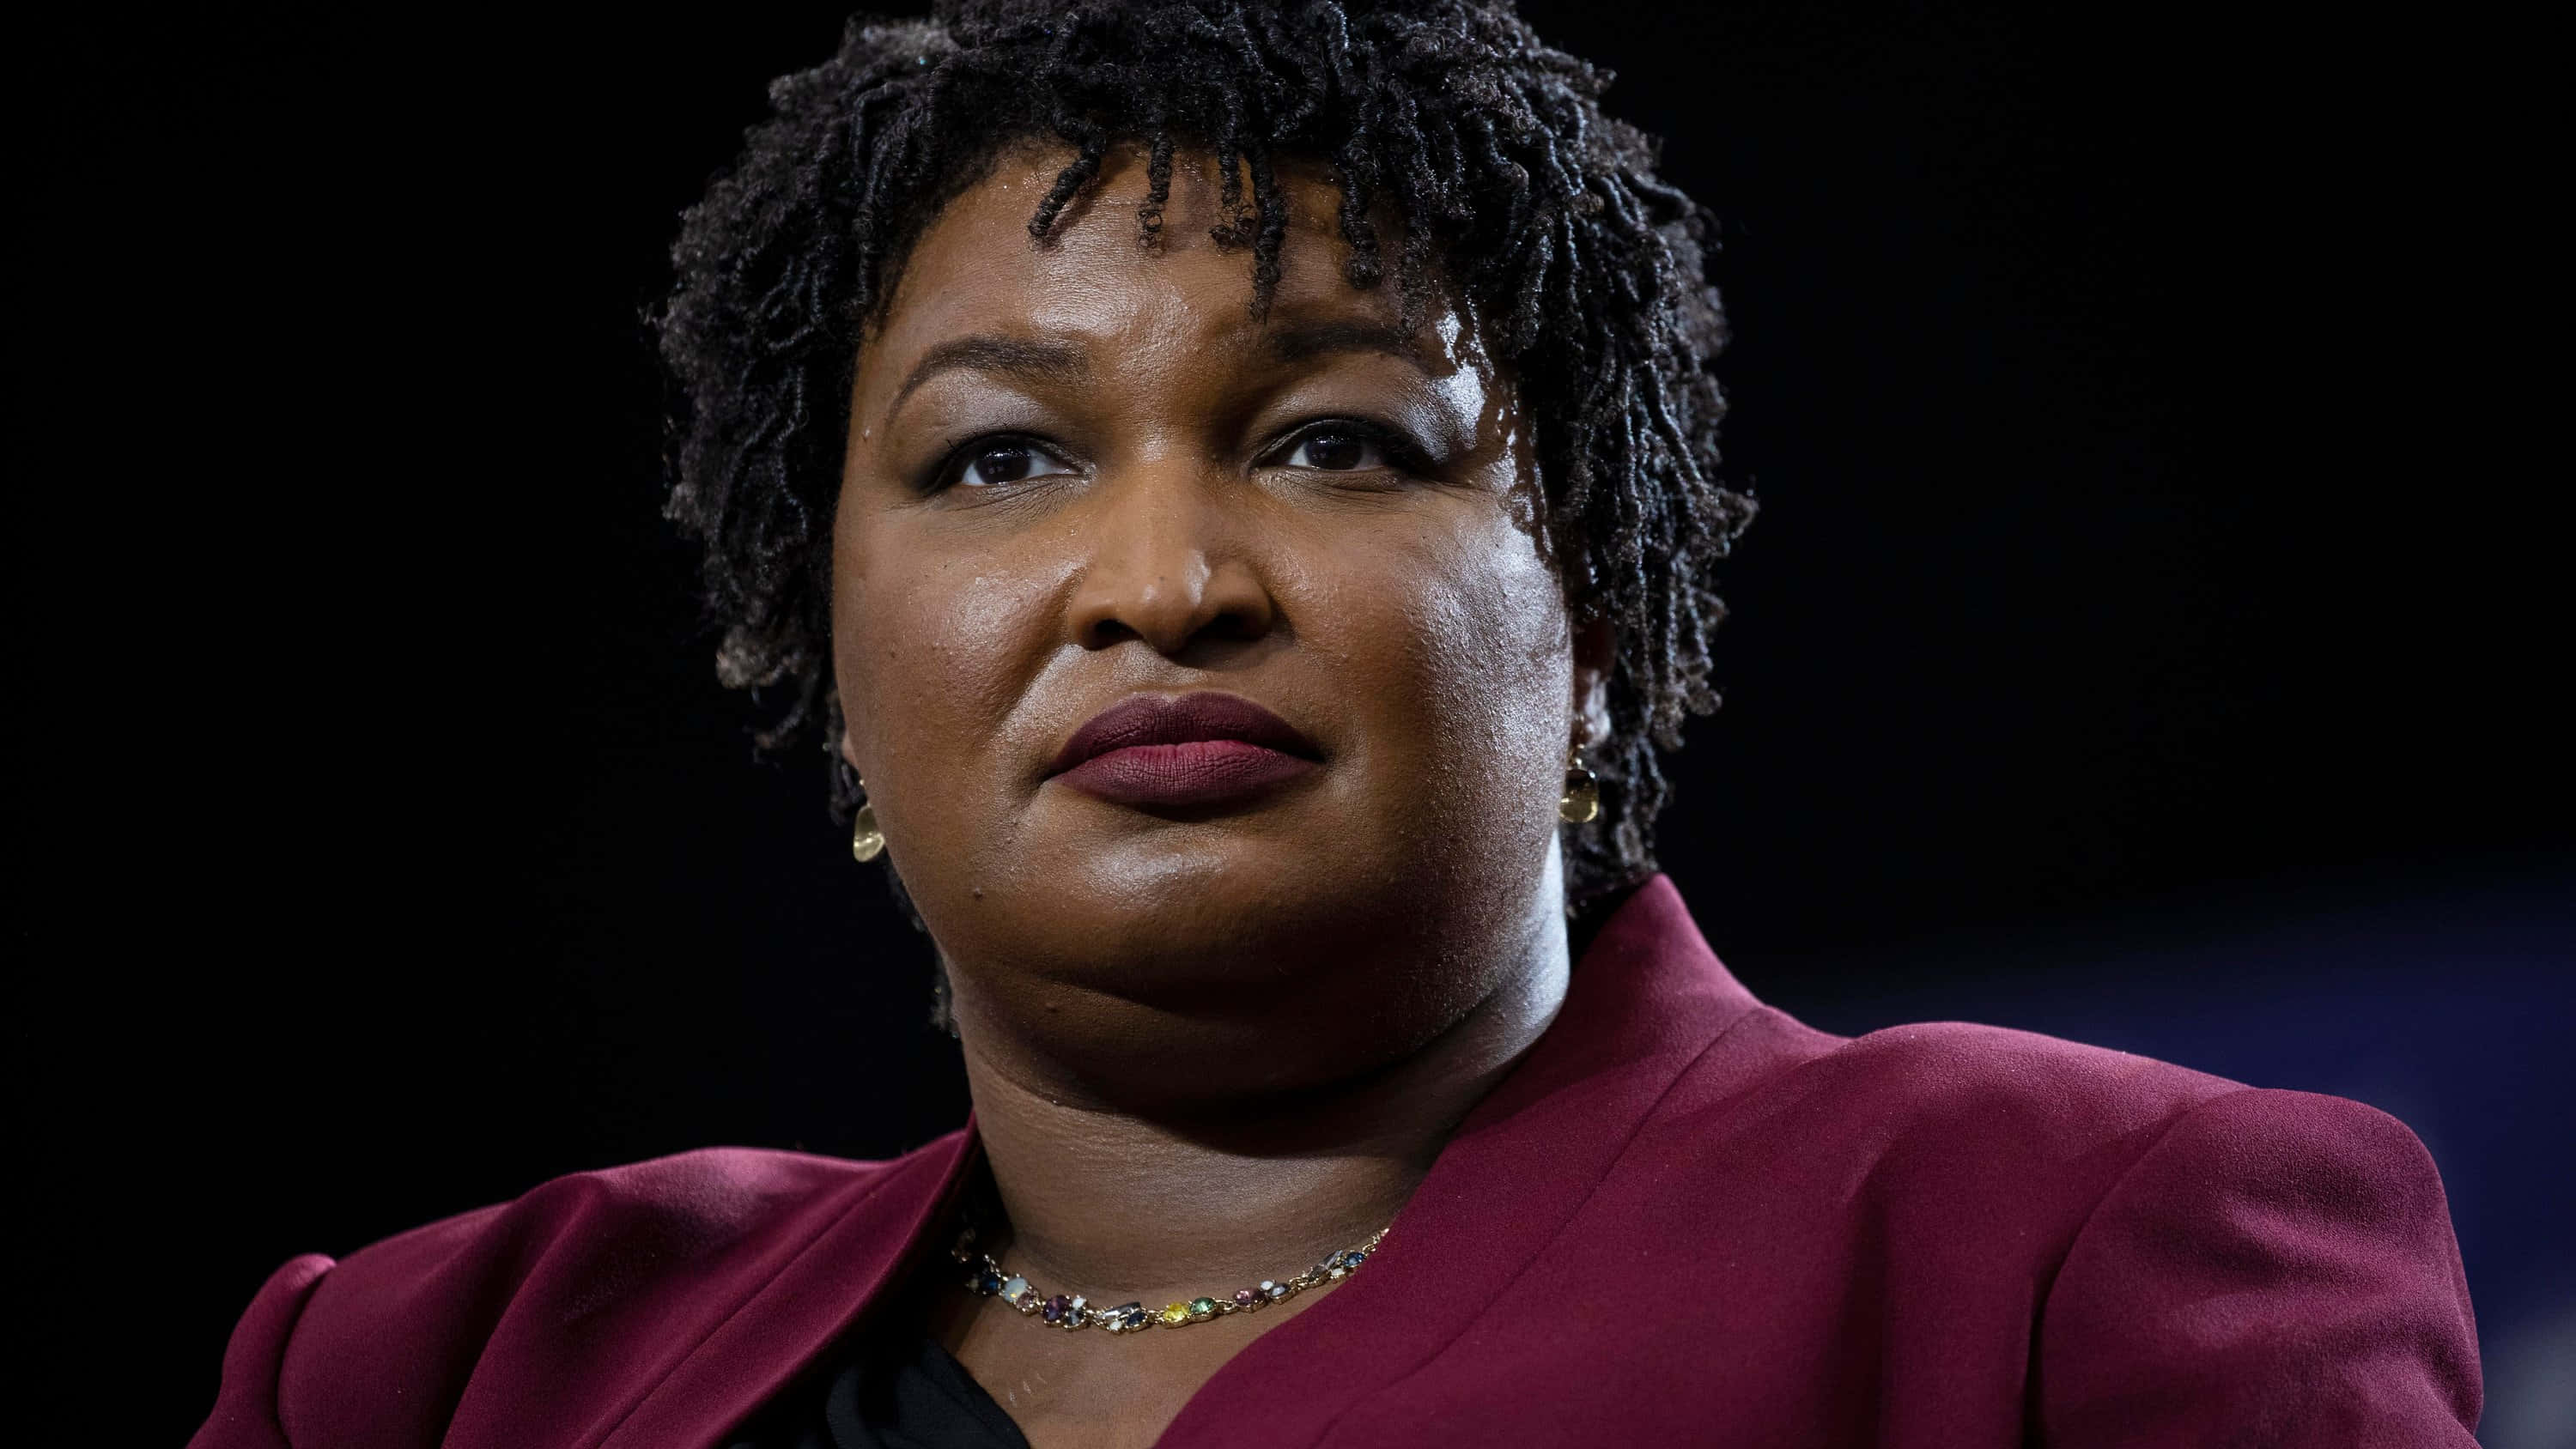 Stacey Abrams Standing With Determined Look Wallpaper